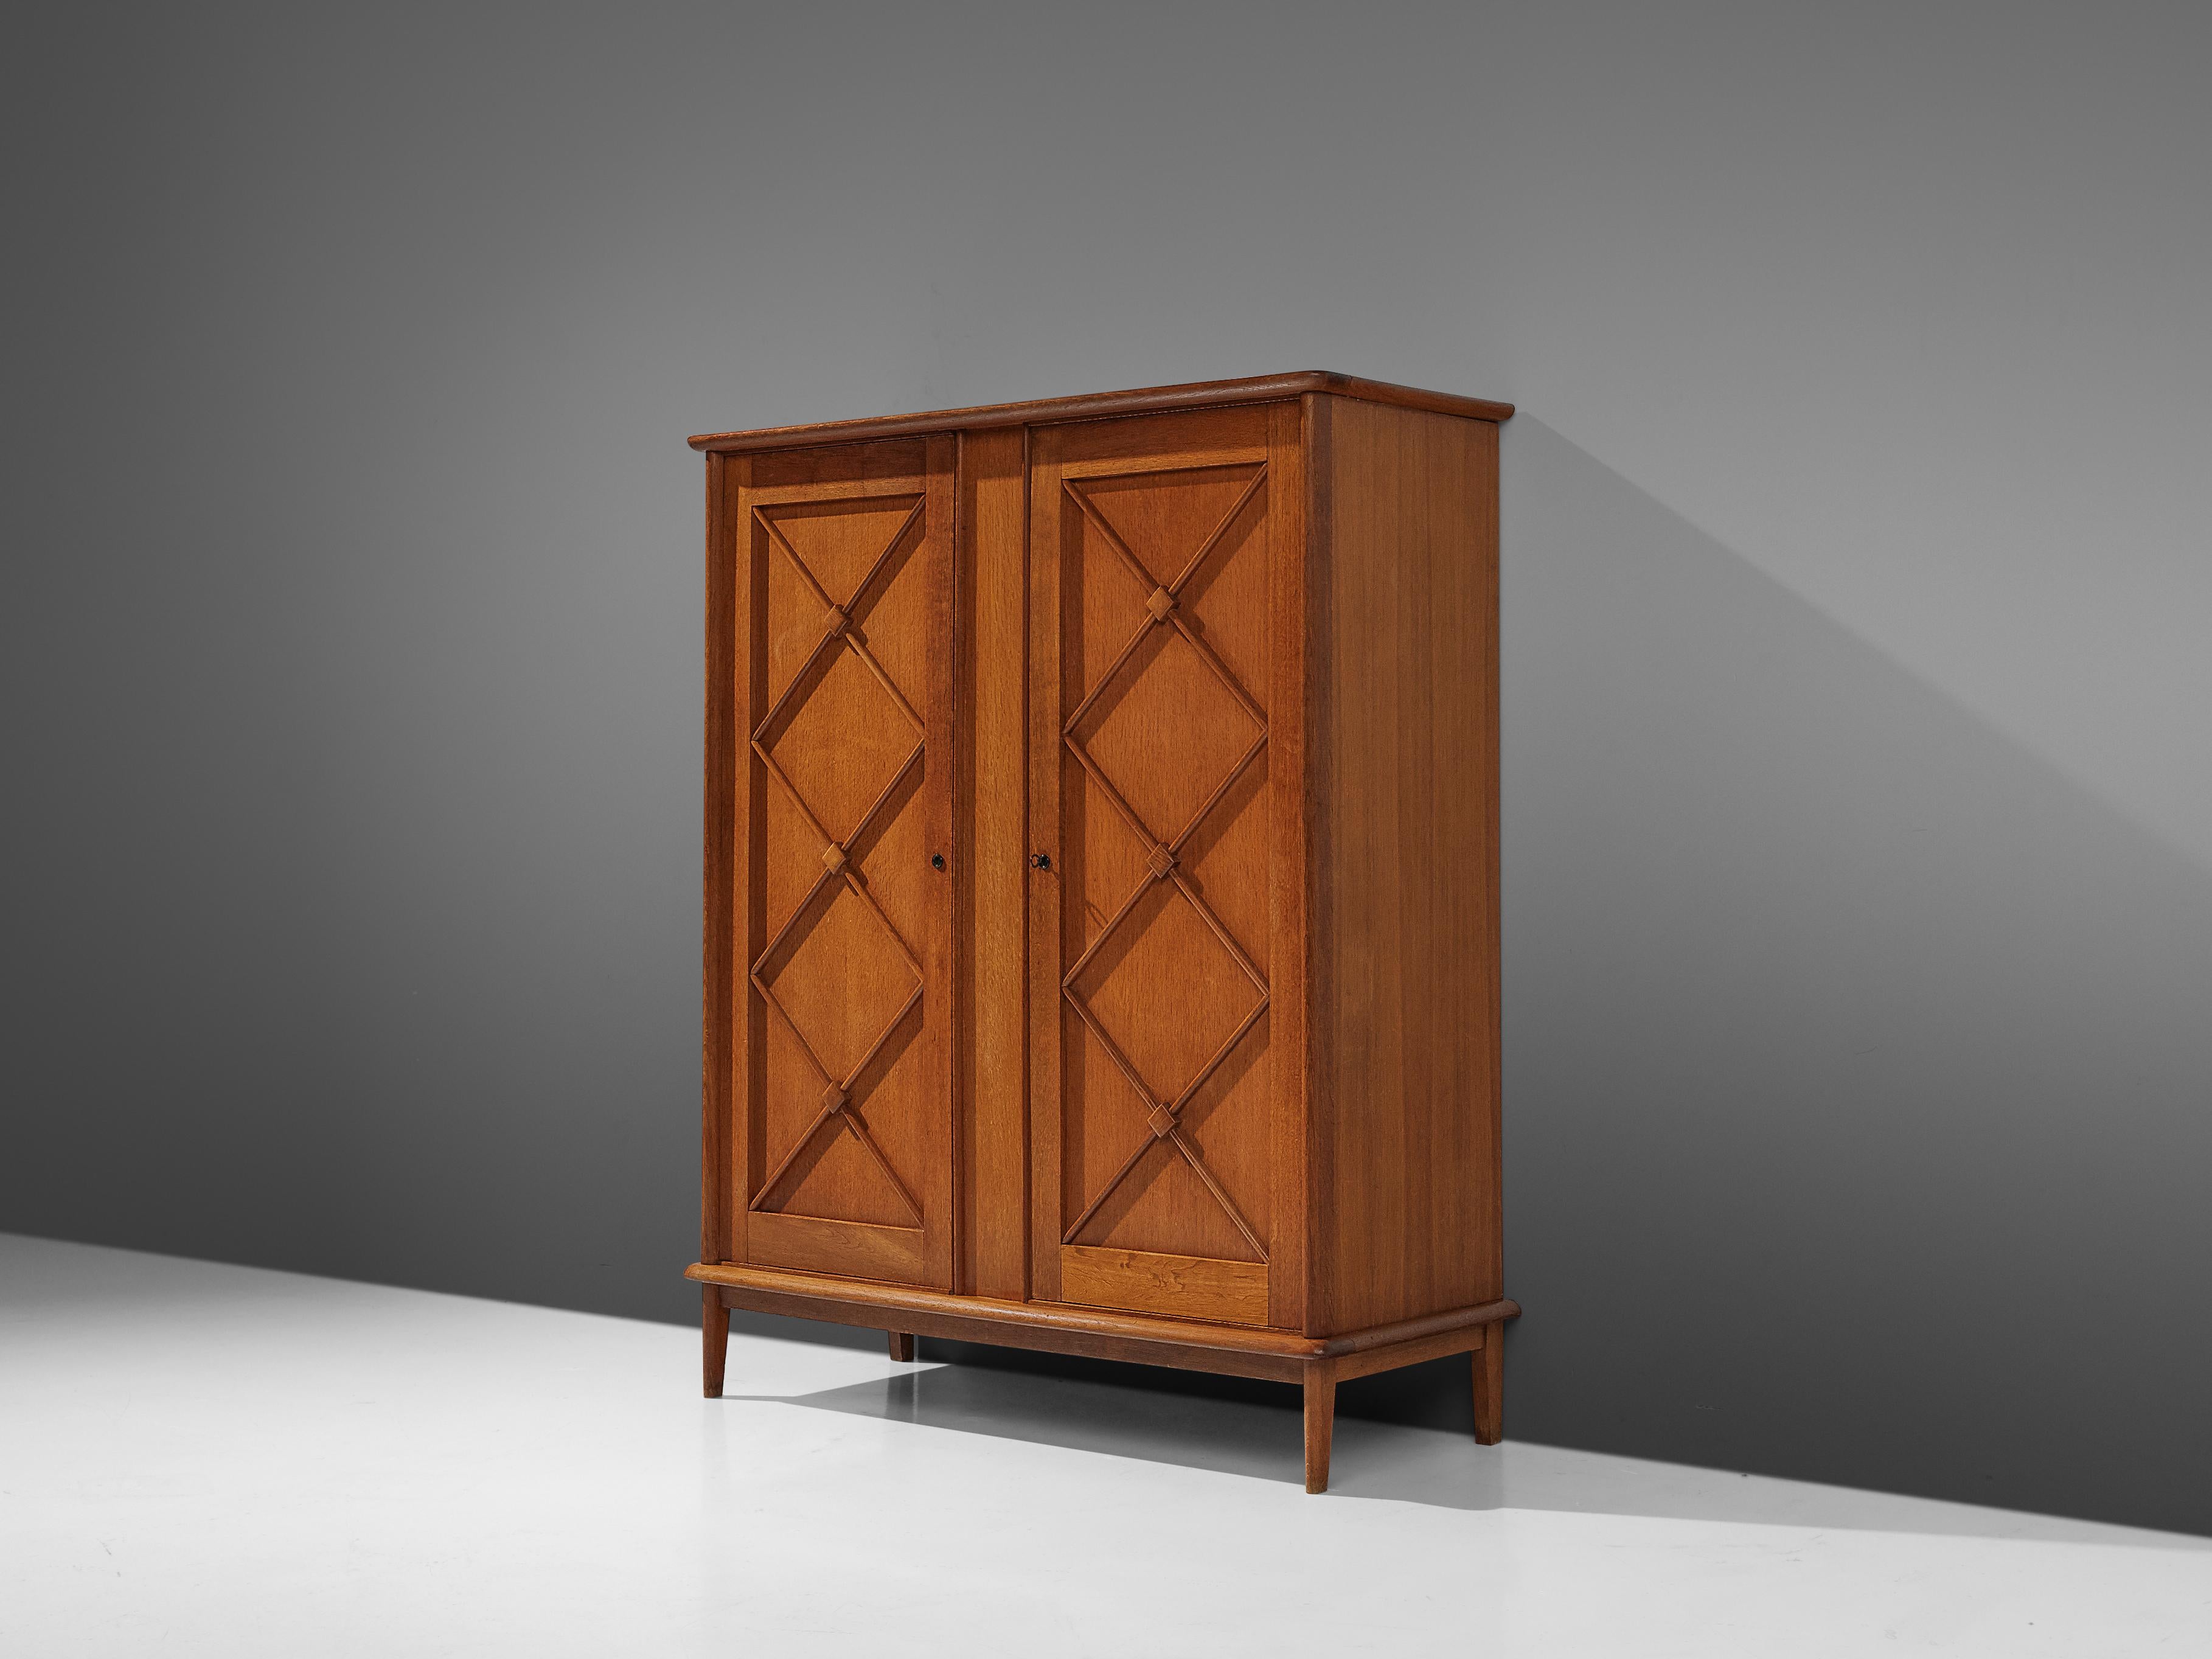 Wardrobe, oak, France, 1960s.

An elegant wardrobe in oak that features geometric details in the doors. Round slats with accentuated midpoints decorate the two doors. The inside is structured in two compartments. On the left a clothes rail is